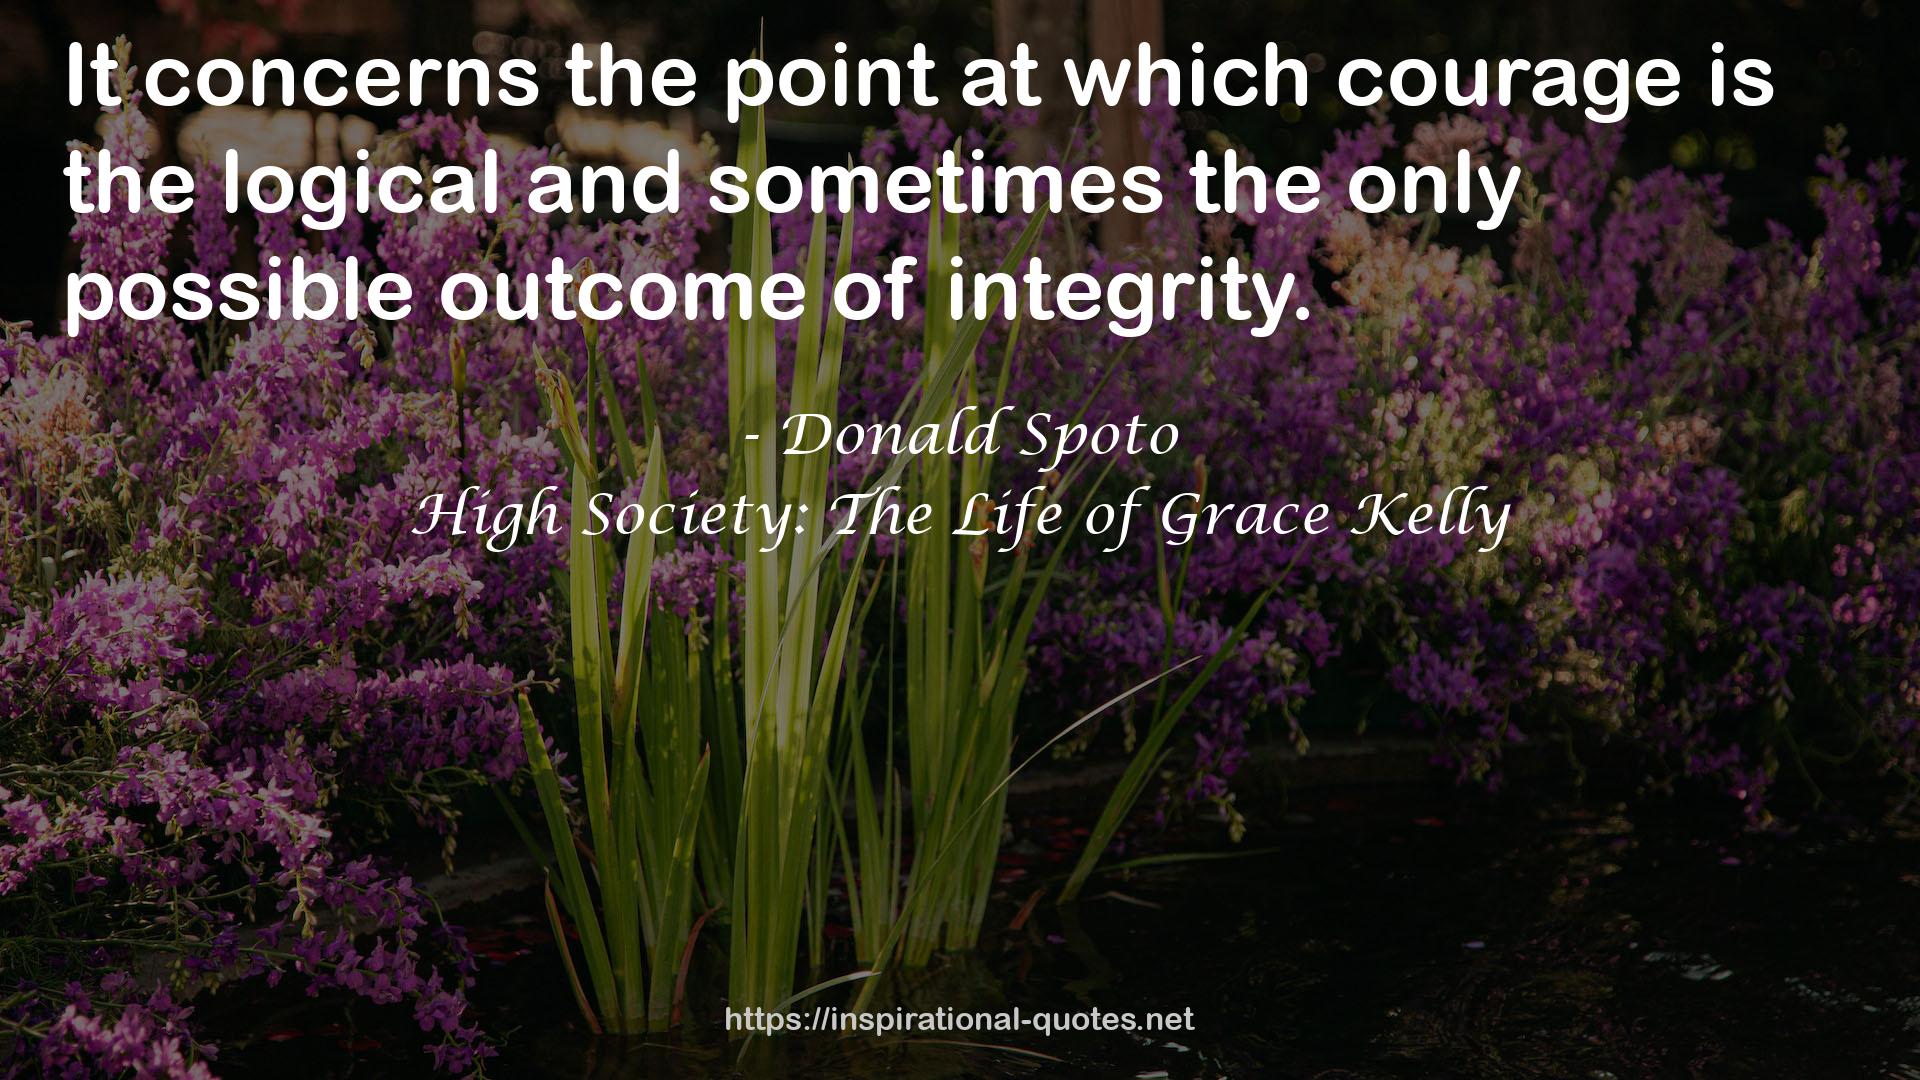 High Society: The Life of Grace Kelly QUOTES